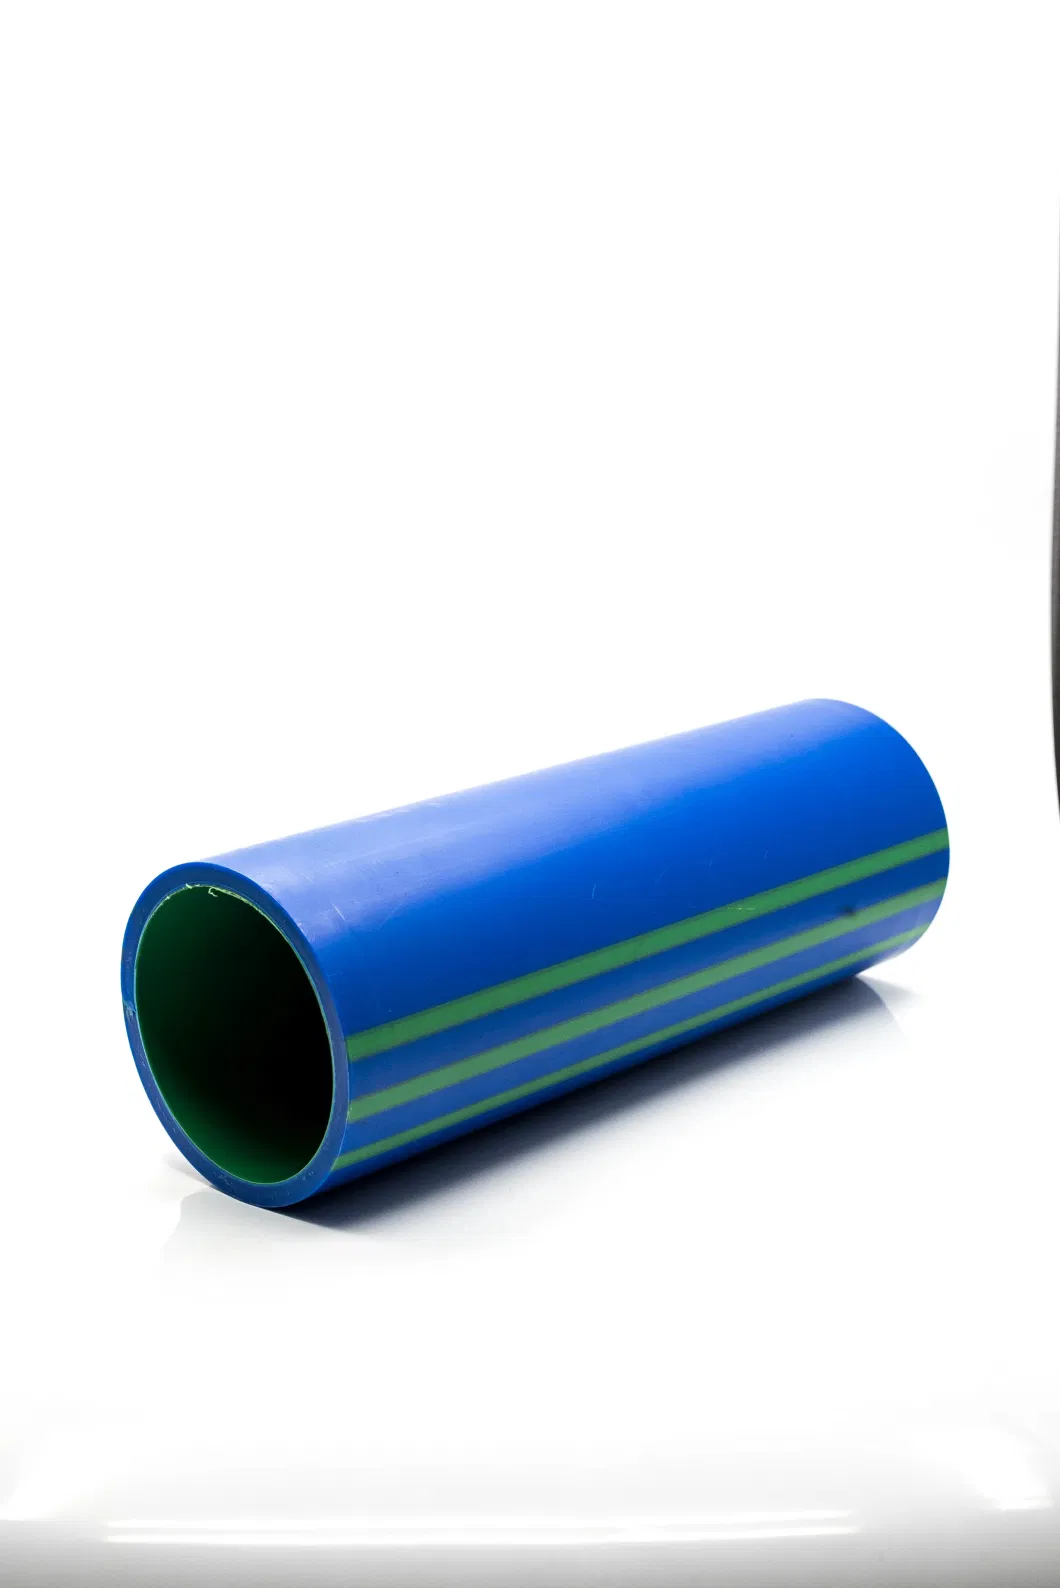 Good Price Plastic Underground Oil Pipe HDPE Gas Station Engineering Oil Tube